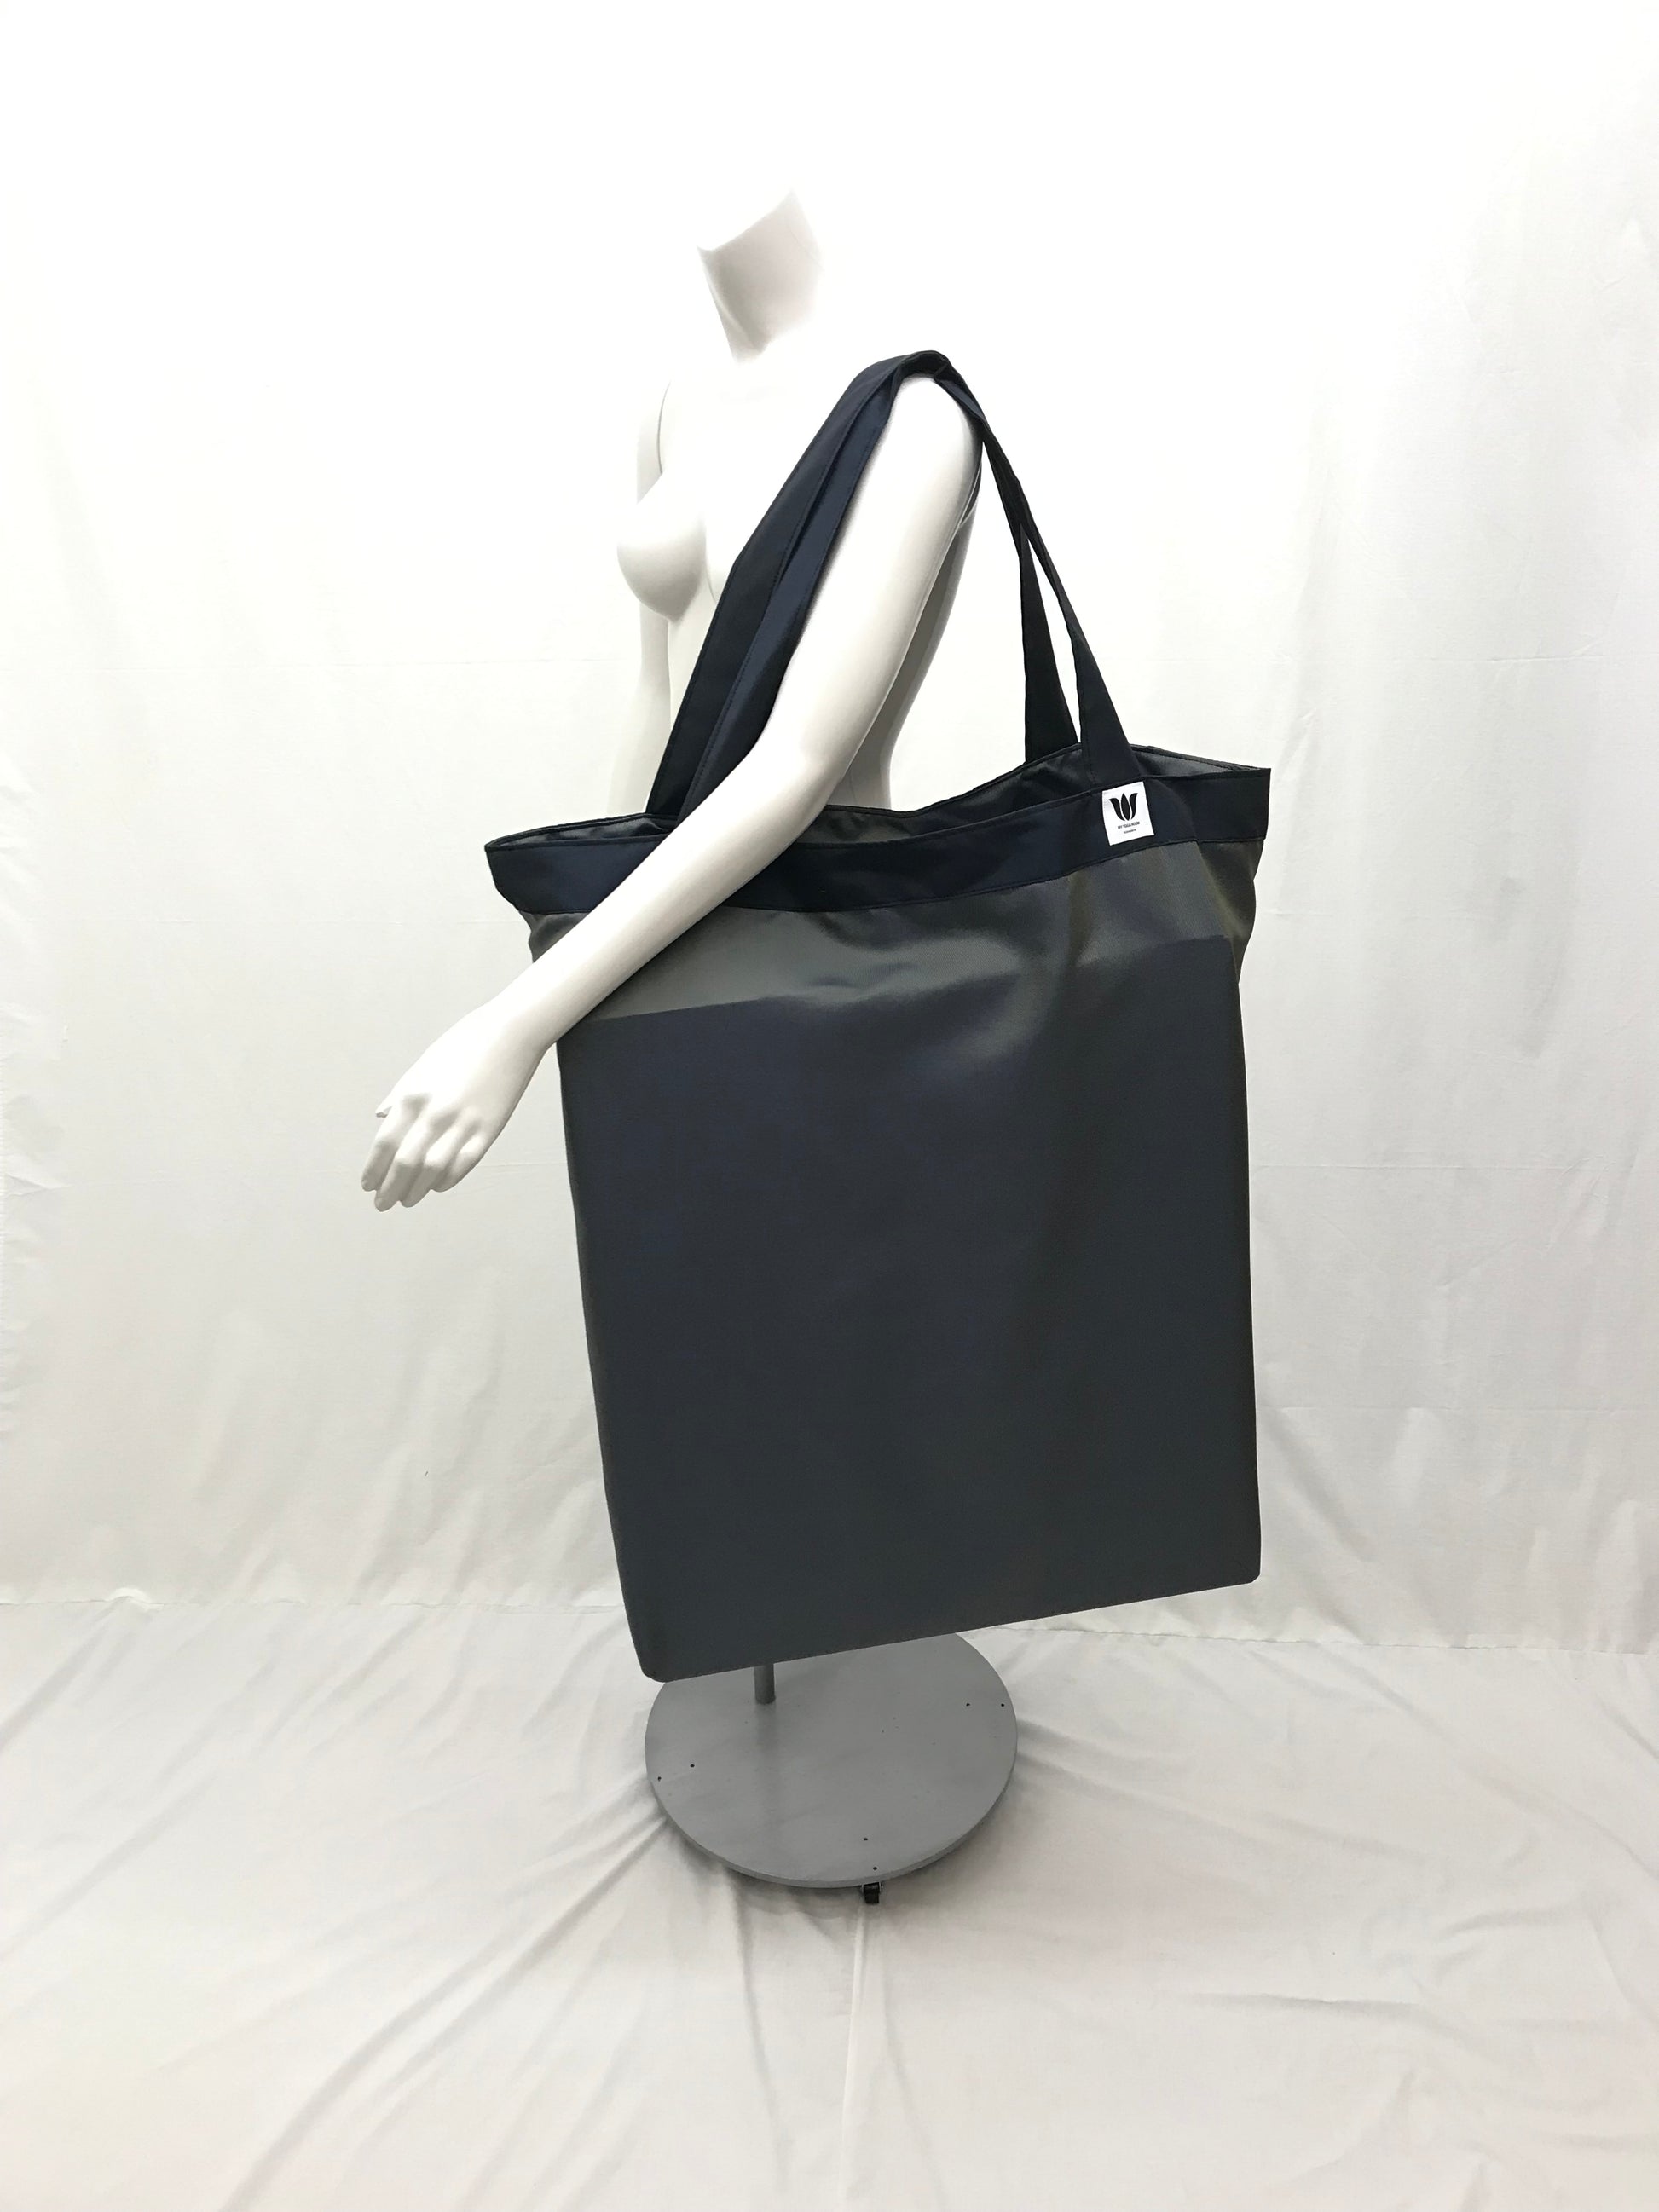 Extra Large Yoga Tote Bag in subtle iridescent blue fabric to carry and or store yoga props for yoga practice. Made in Canada by My Yoga Room Elements